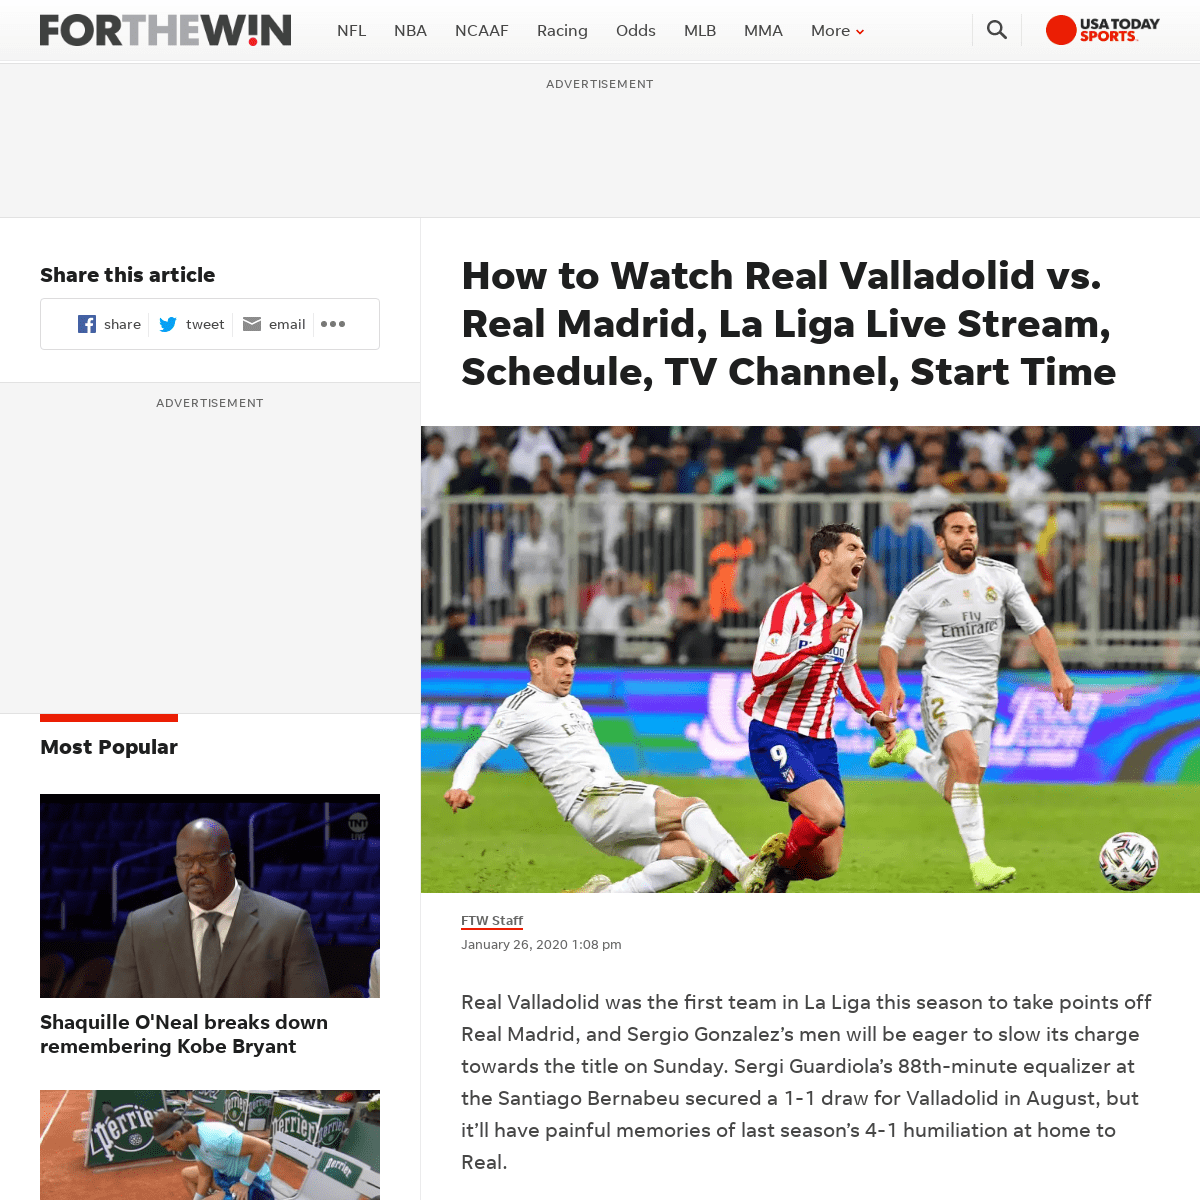 A complete backup of ftw.usatoday.com/2020/01/how-to-watch-real-valladolid-vs-real-madrid-la-liga-live-stream-schedule-tv-channe